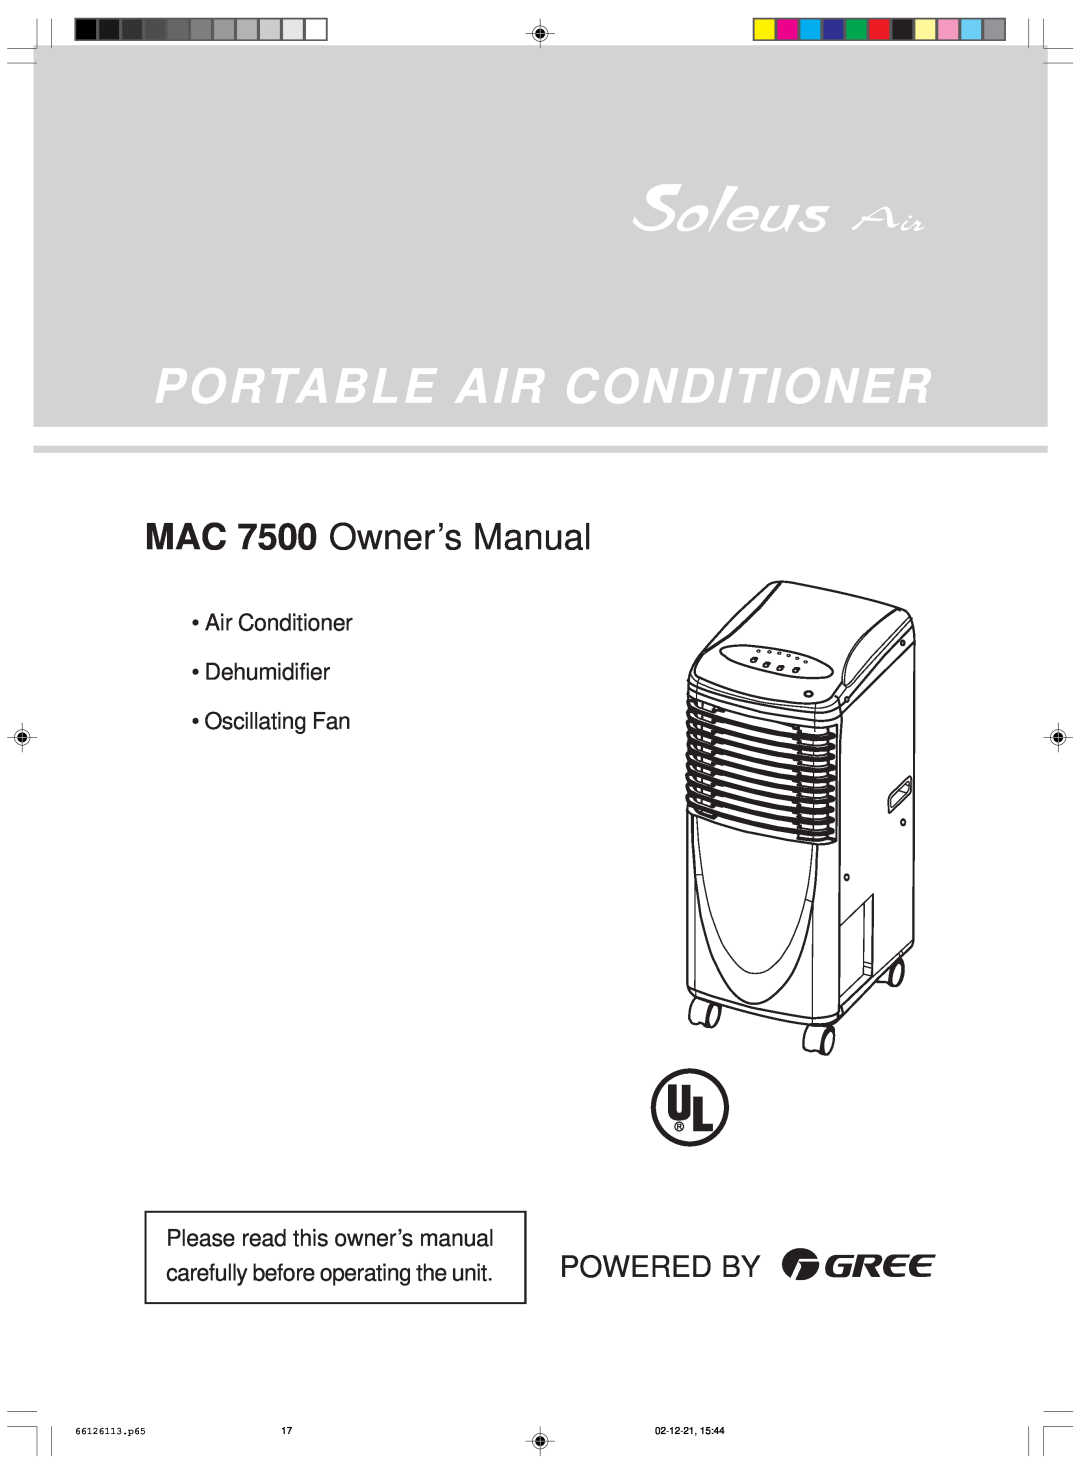 Soleus Air MAC 7500 owner manual Portable Air Conditioner, Powered By, Air Conditioner Dehumidifier, Oscillating Fan 